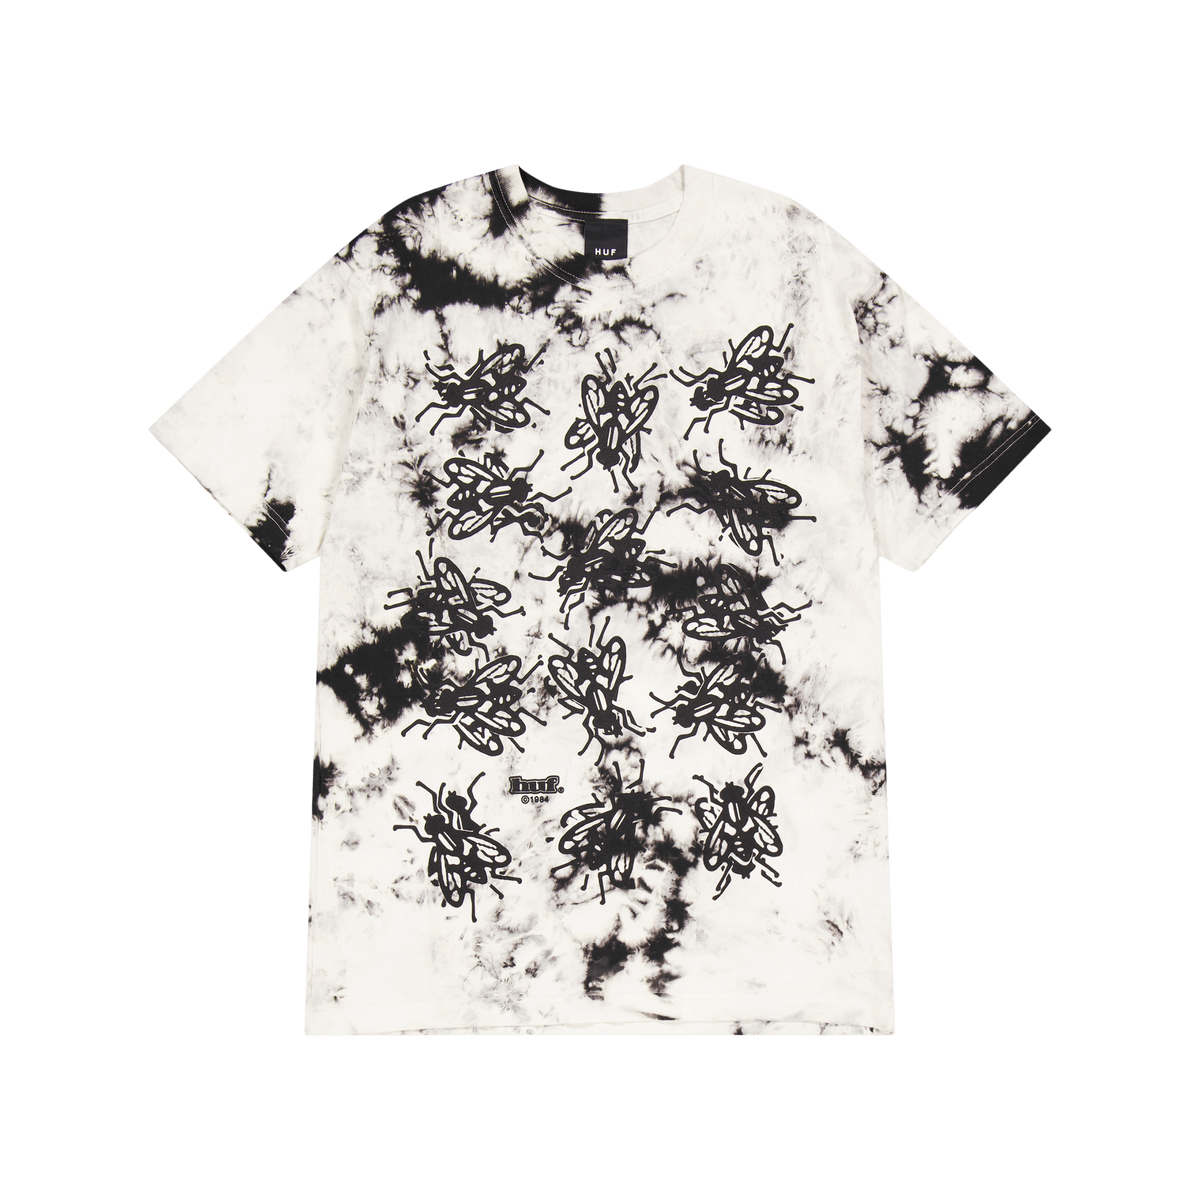 Fly Situation S/s Tiedye Tee Black